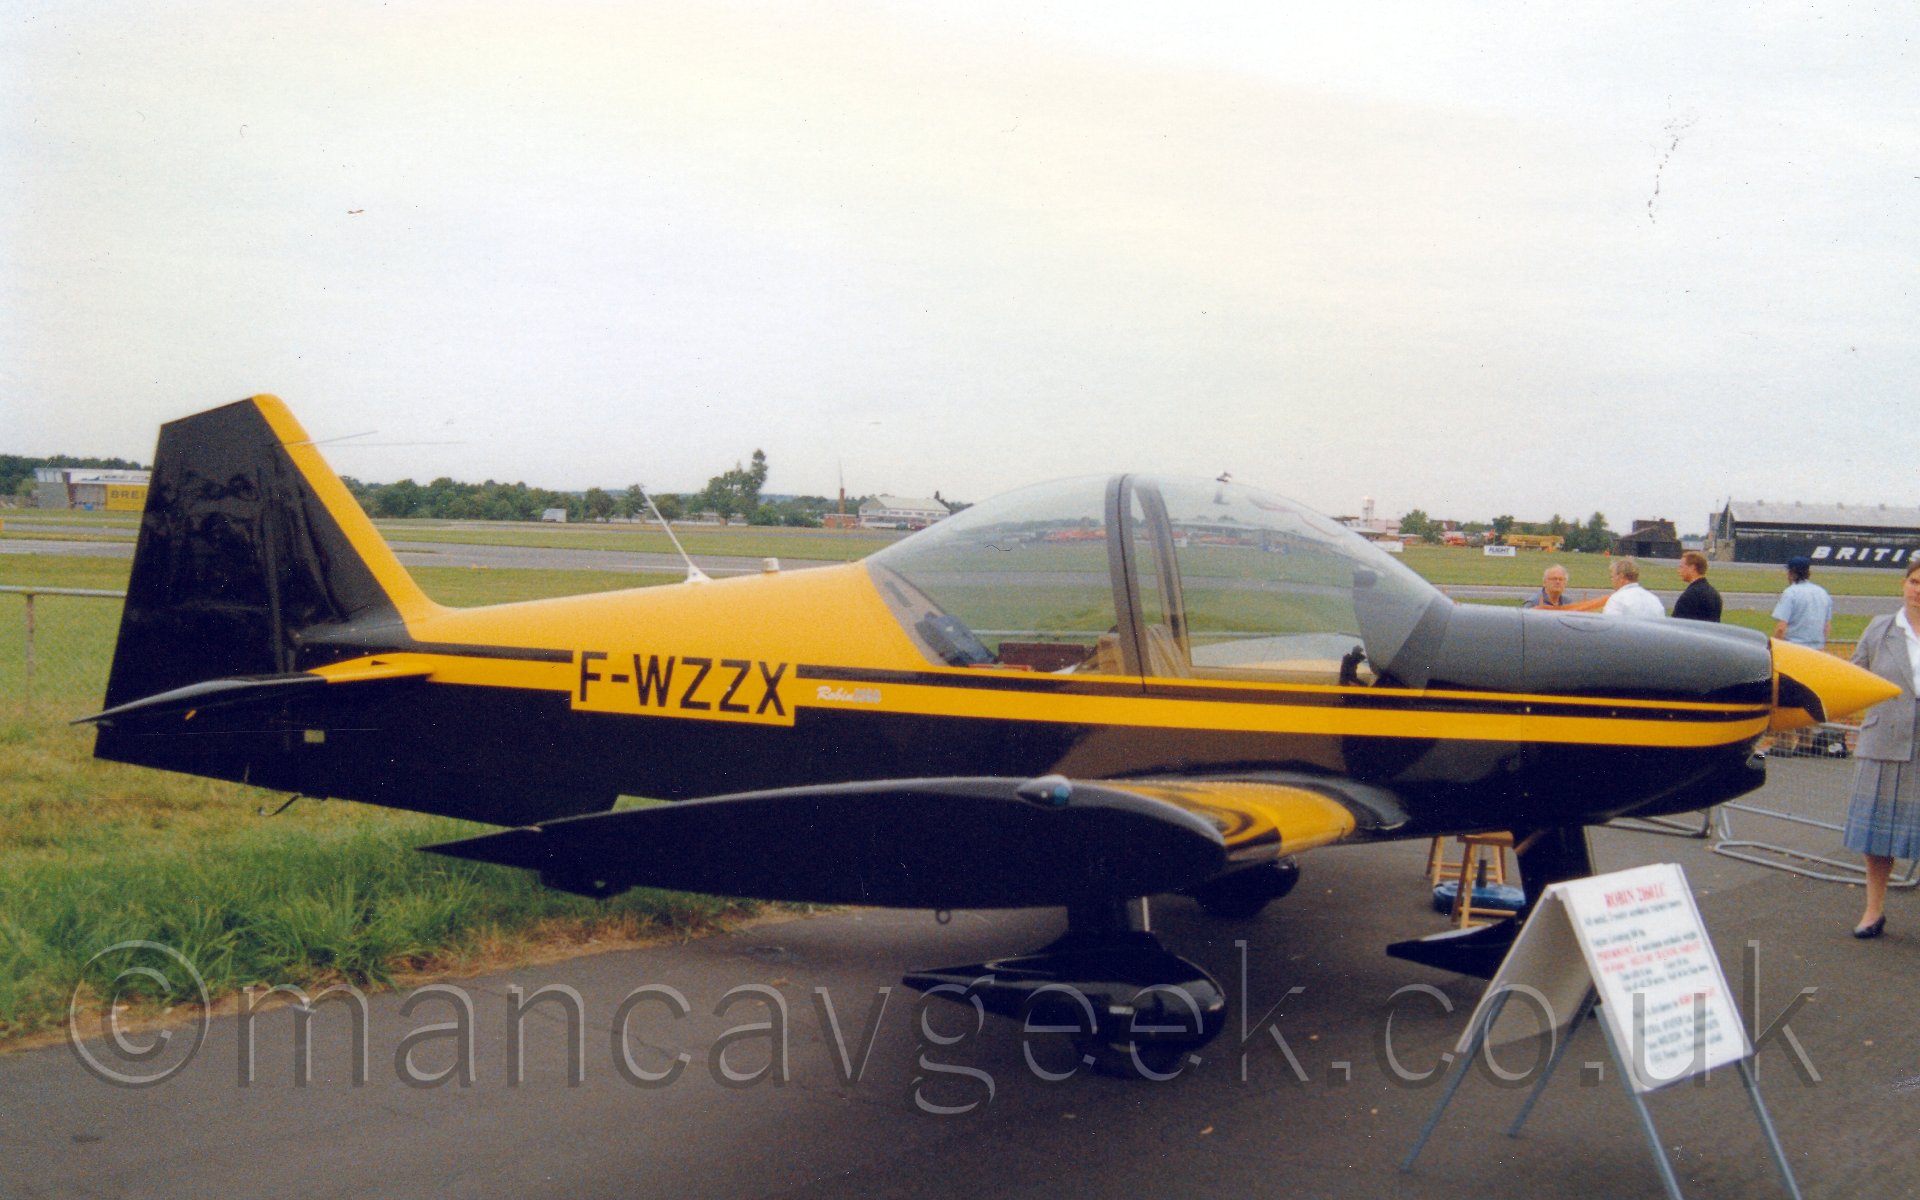 Side view of a single-engined, 2 seat light aircraft parked facing to the right. The plane is mostly black, with with a yellow stripe runnning along the body and the front edge of the tail, with the top of the rear fuselage aft of the cockpit also being yellow. The plane has a fixed undercarriage, with black spats over the wheels. There is a white A-frame holding some information about the plane for anyone who may be interested. Some people can be seen standing around on the far side, behind a waist-level metal fence. In the background, a large black hangar can be seen on the far side of the airfield on the left of the frame, with other buildings and trees stretched across the rest of the frame, under a cloudy grey sky.